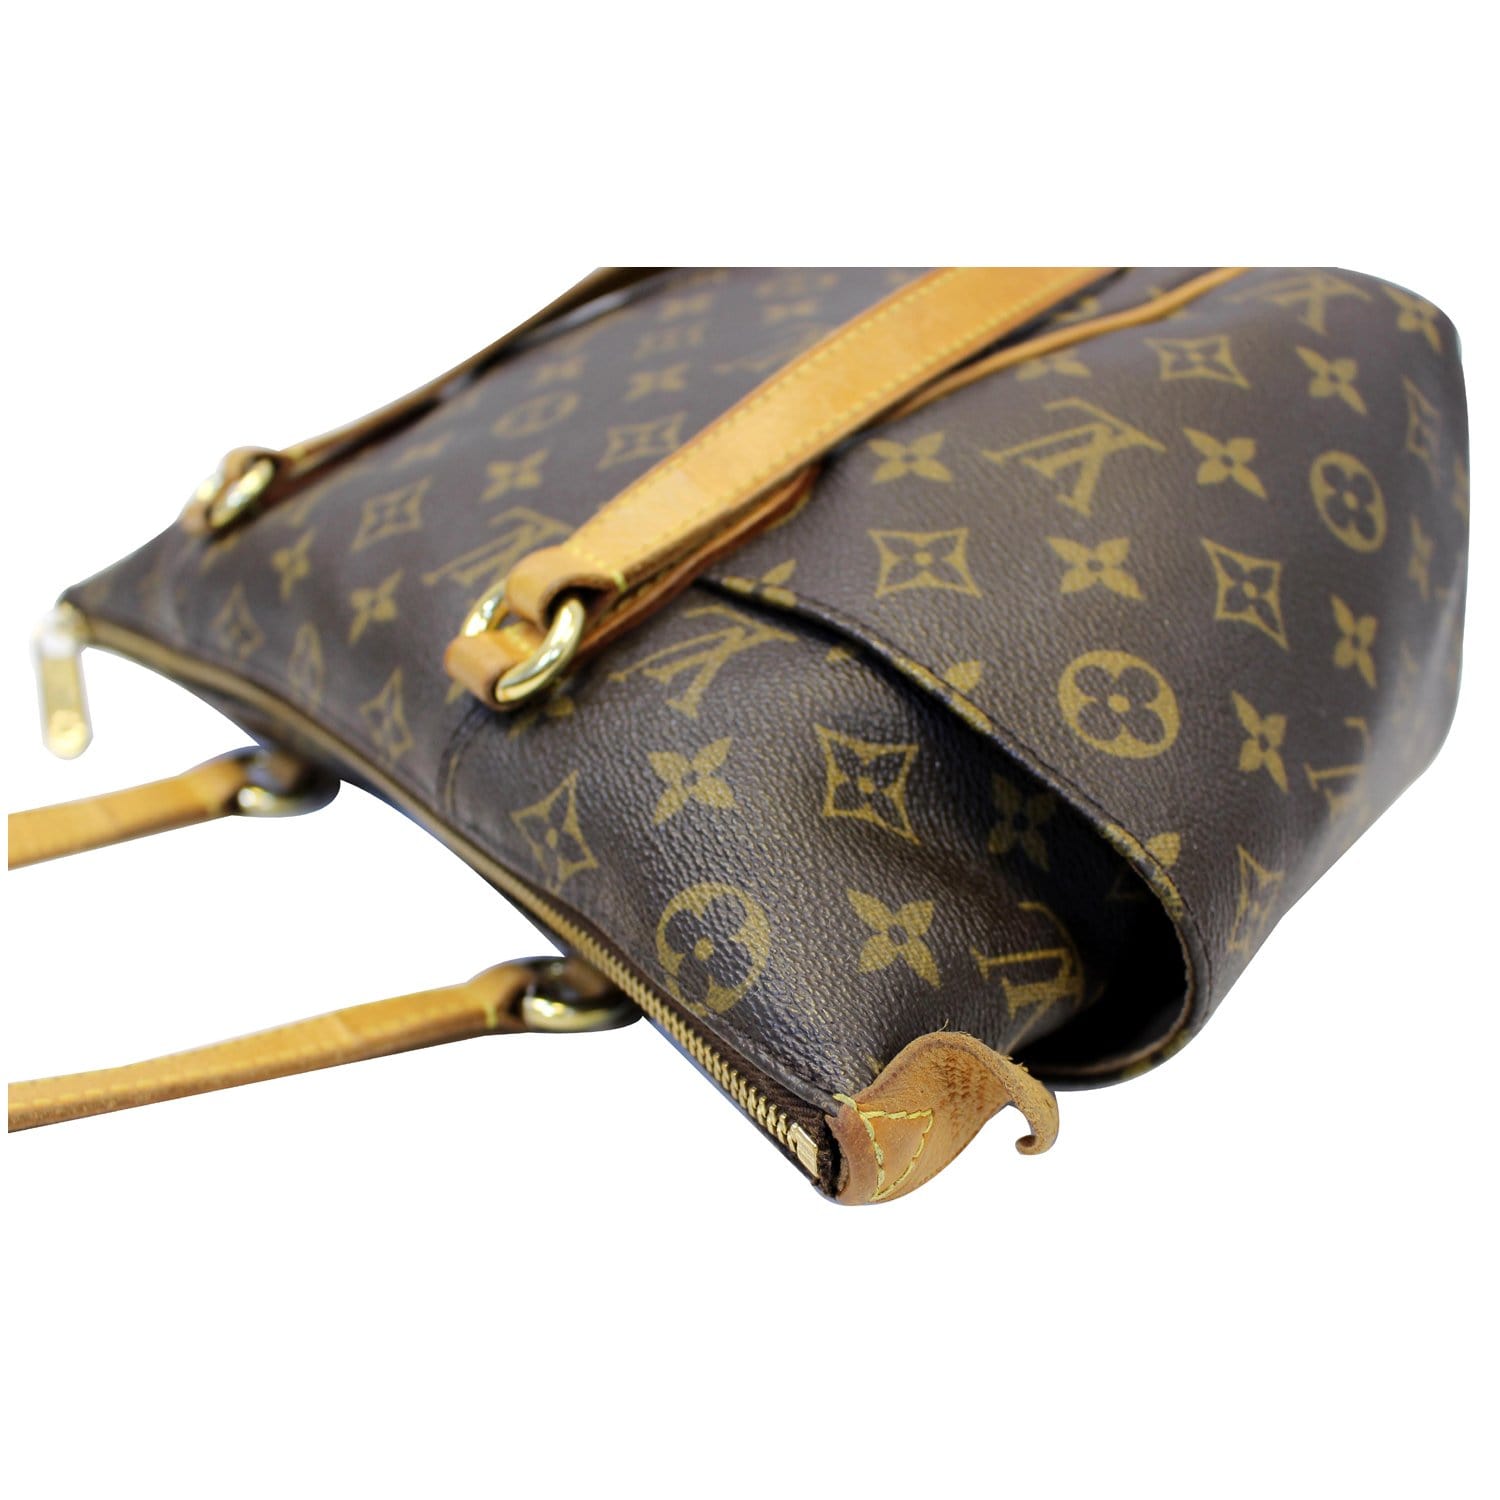 Authentic Louis Vuitton Monogram Totally PM Tote Bag Brown M56688 Used F/S